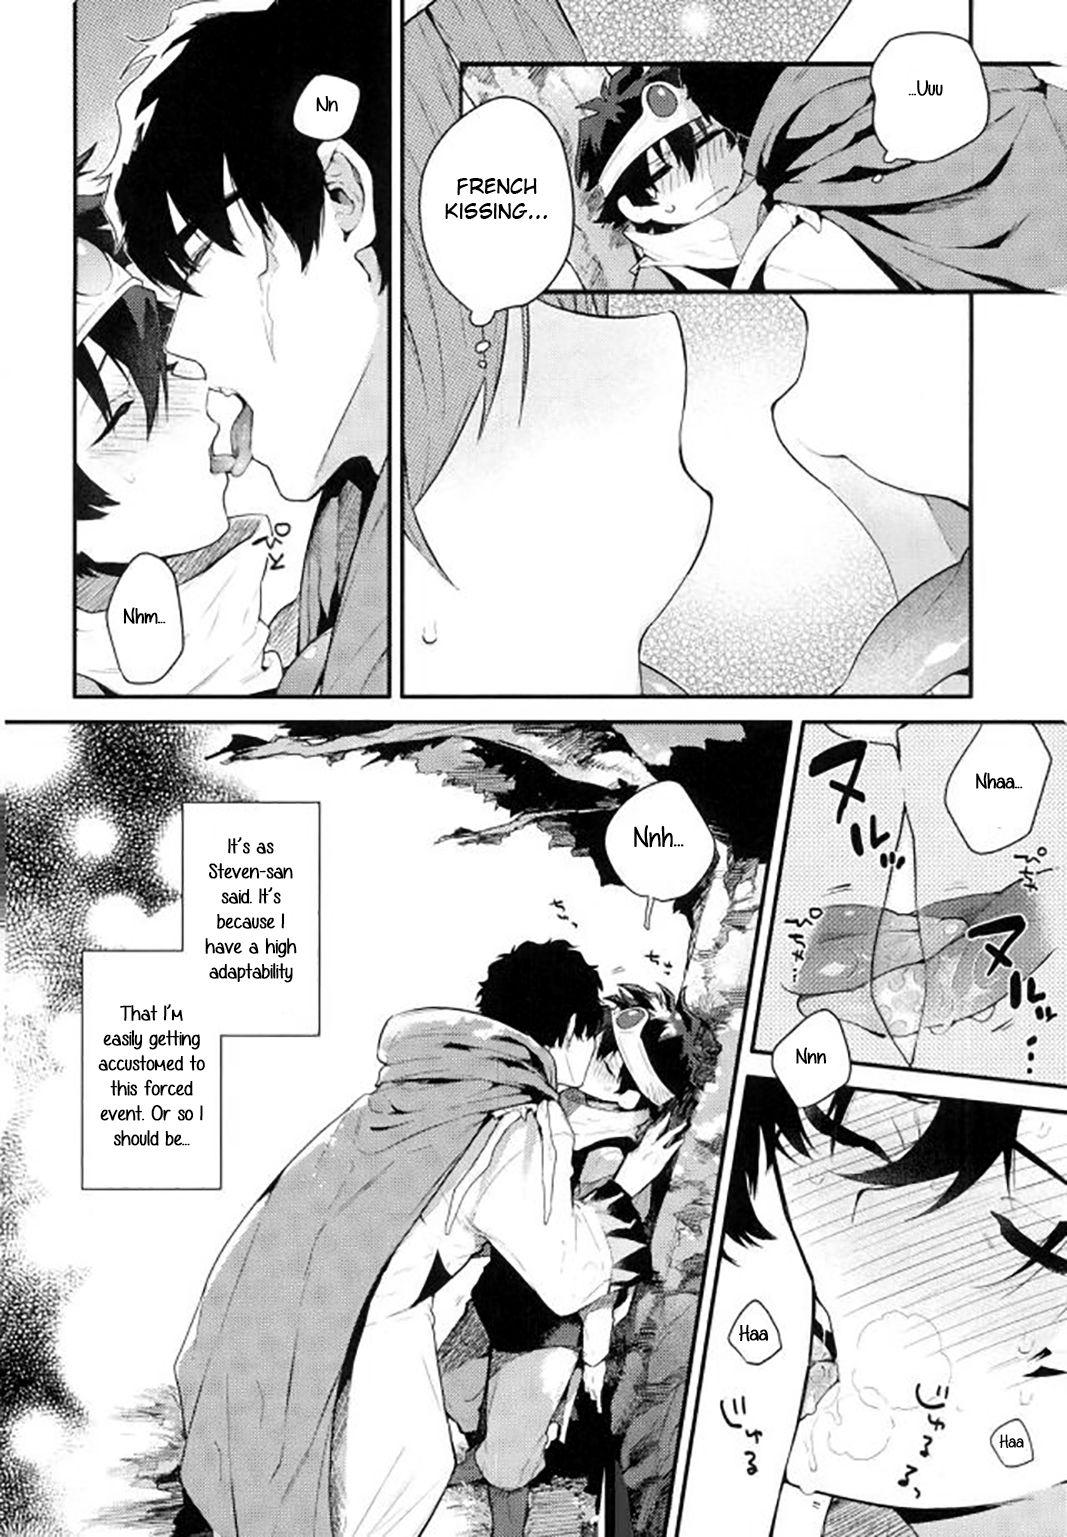 Coroa After Being Sent to Another World I'm Forced to a Love Event With My Boss!? - Kekkai sensen Blowjob - Page 7